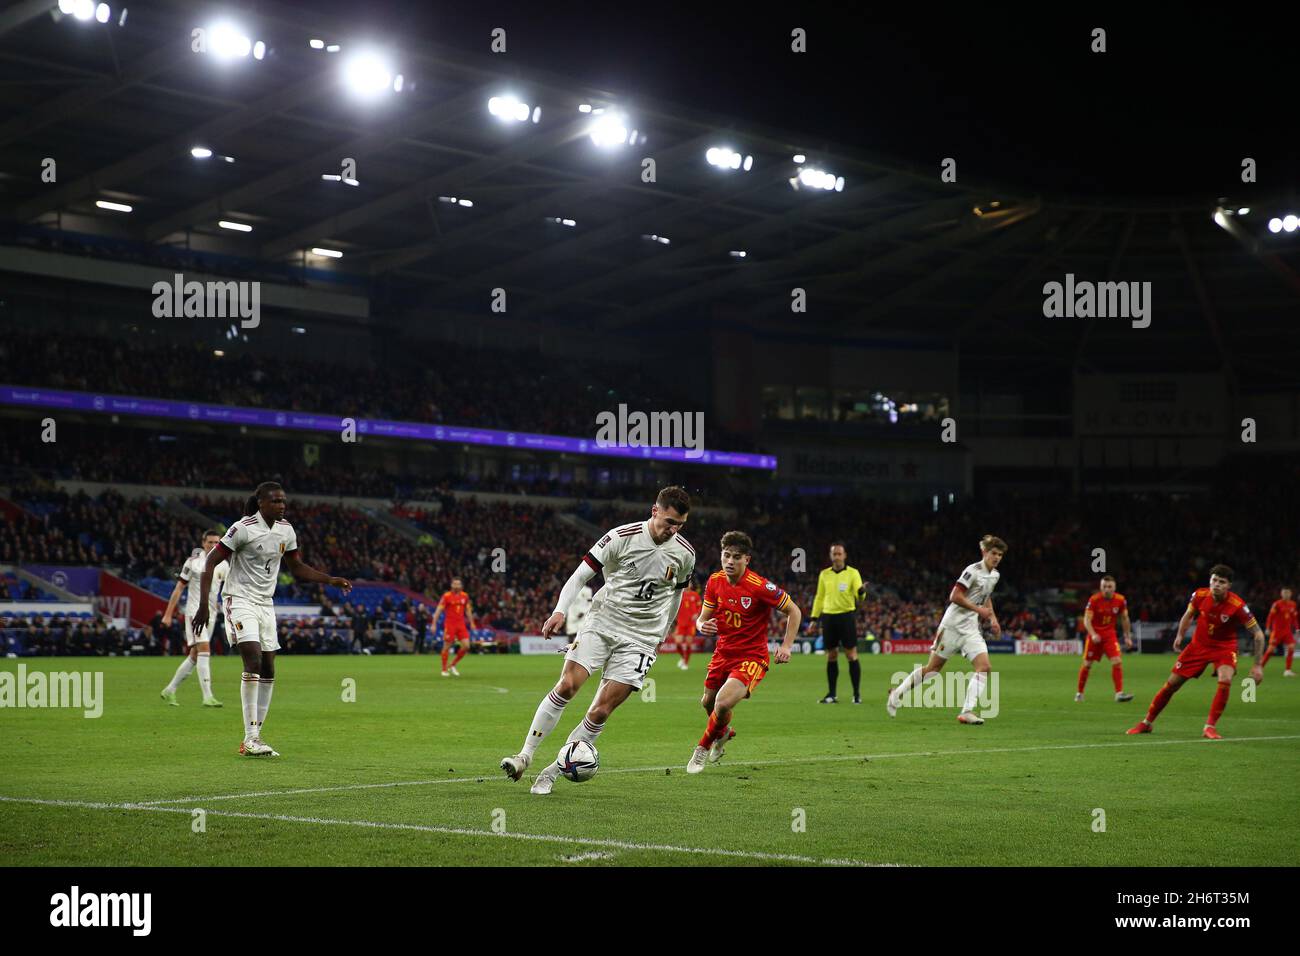 Cardiff, UK. 16th Nov, 2021. Thomas Meunier of Belgium (15) and Daniel James of Wales (20) in action. FIFA World Cup qualifier, group E, Wales v Belgium at the Cardiff city stadium in Cardiff, South Wales on Tuesday 16th November 2021. Editorial use only. pic by Andrew Orchard/Andrew Orchard sports photography/Alamy Live News Credit: Andrew Orchard sports photography/Alamy Live News Stock Photo